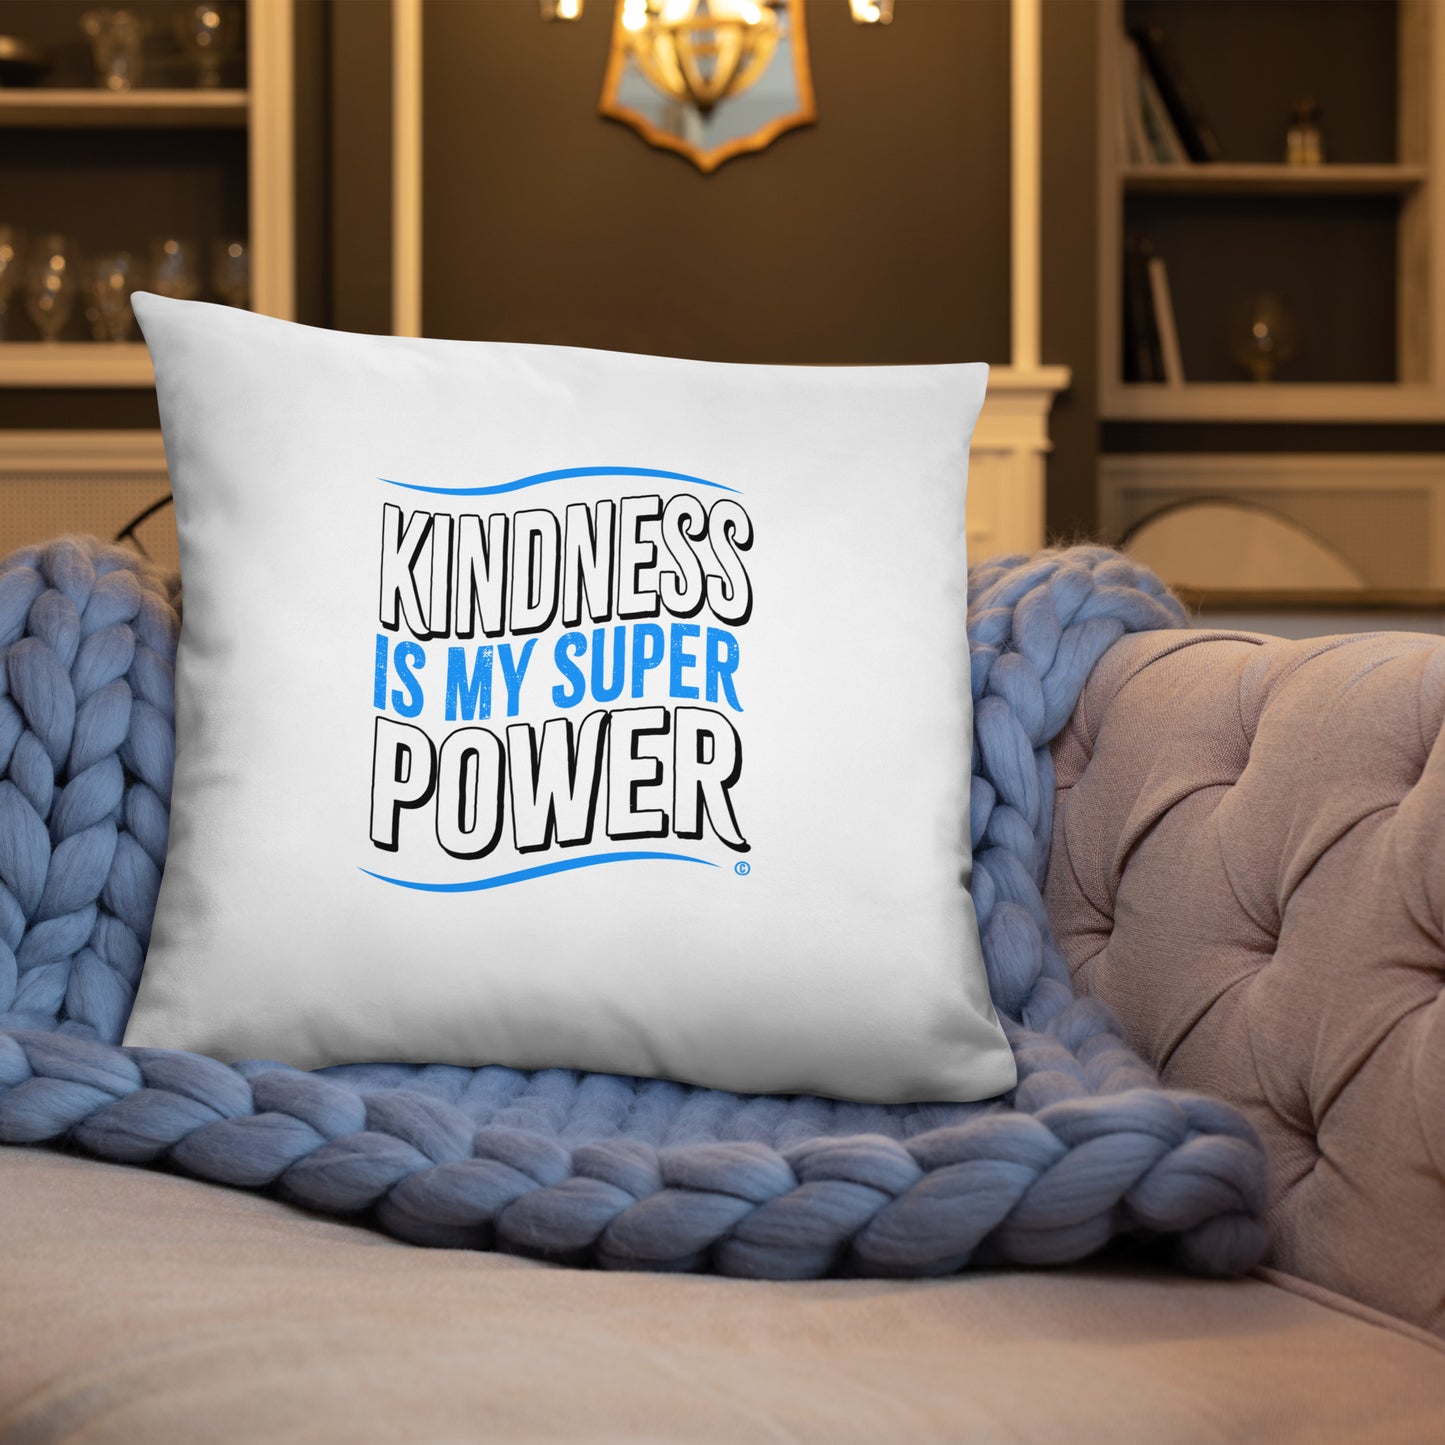 Kindness is my Superpower Basic Pillows